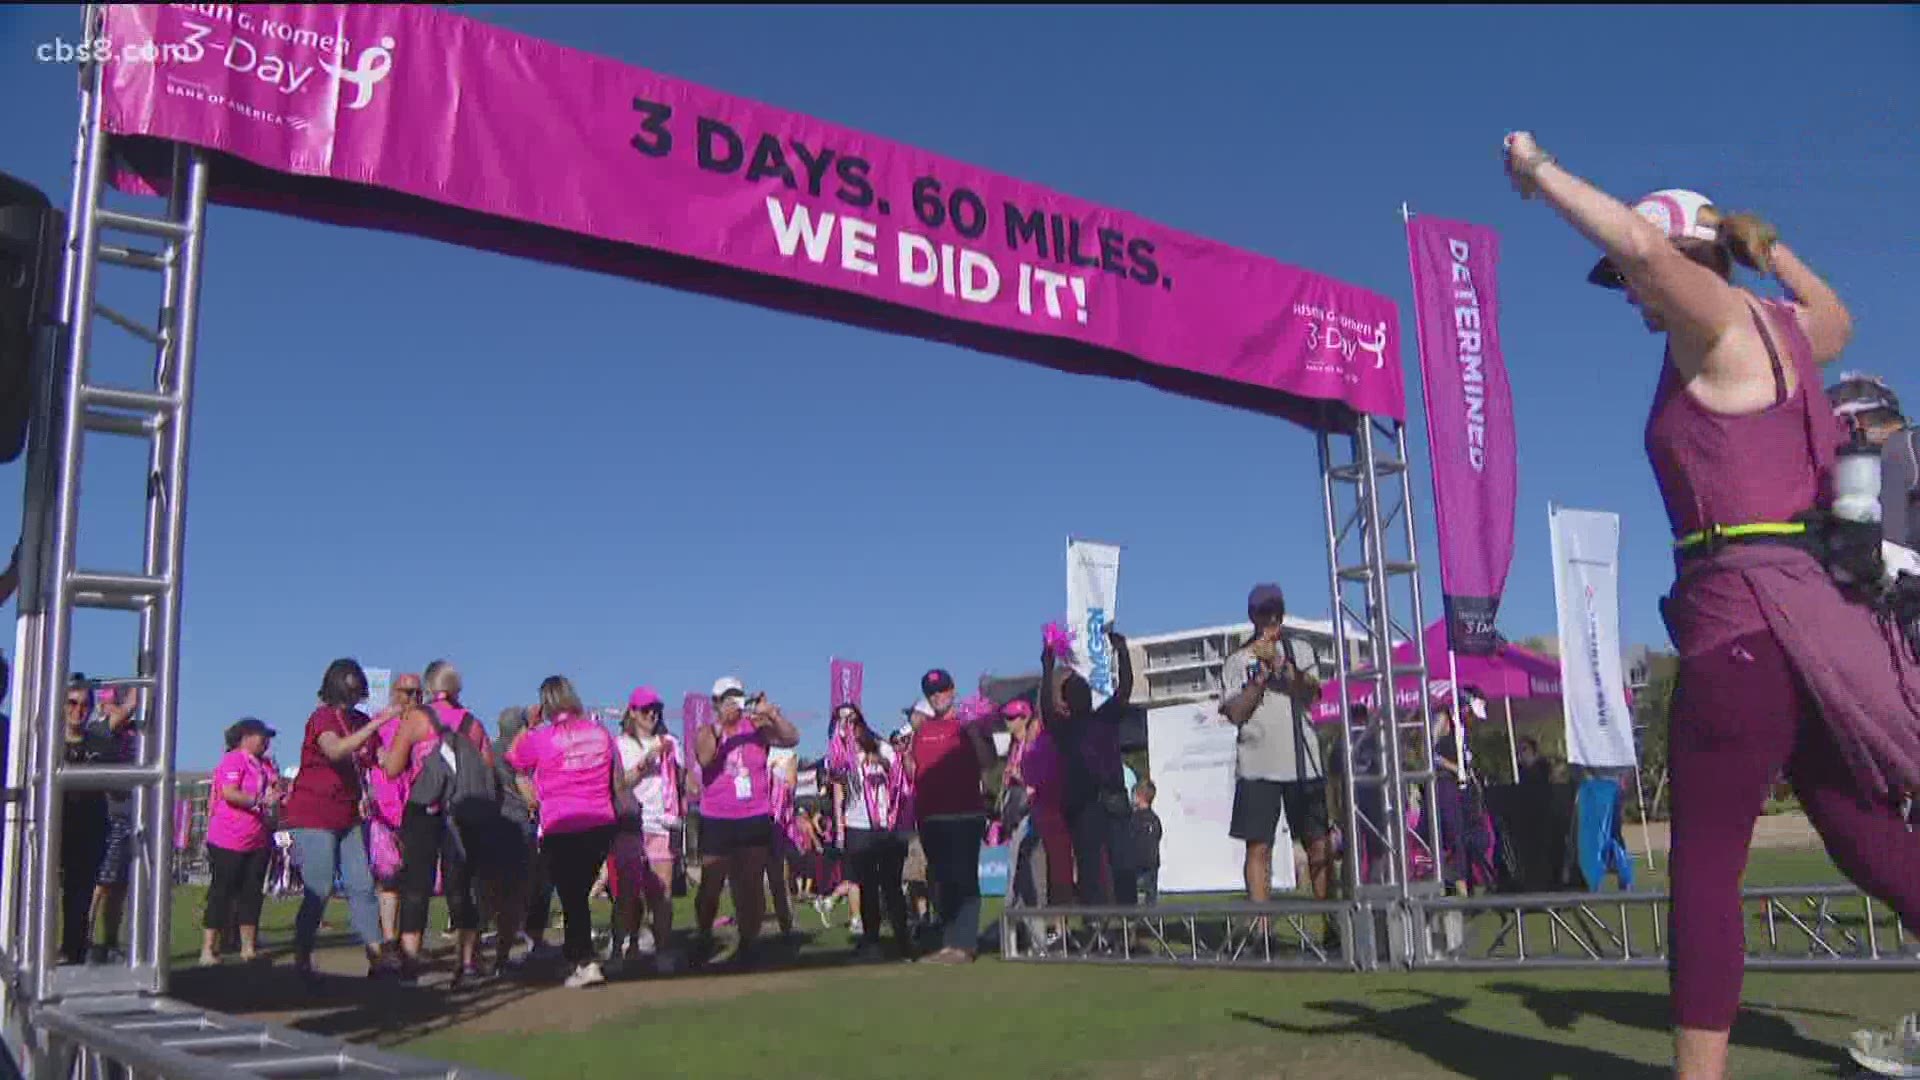 CBS 8 has been a longtime supporter of the Komen San Diego Race for the Cure. The virtual race is Nov. 1 & News 8’s Barbara-Lee Edwards continues to serve as emcee.